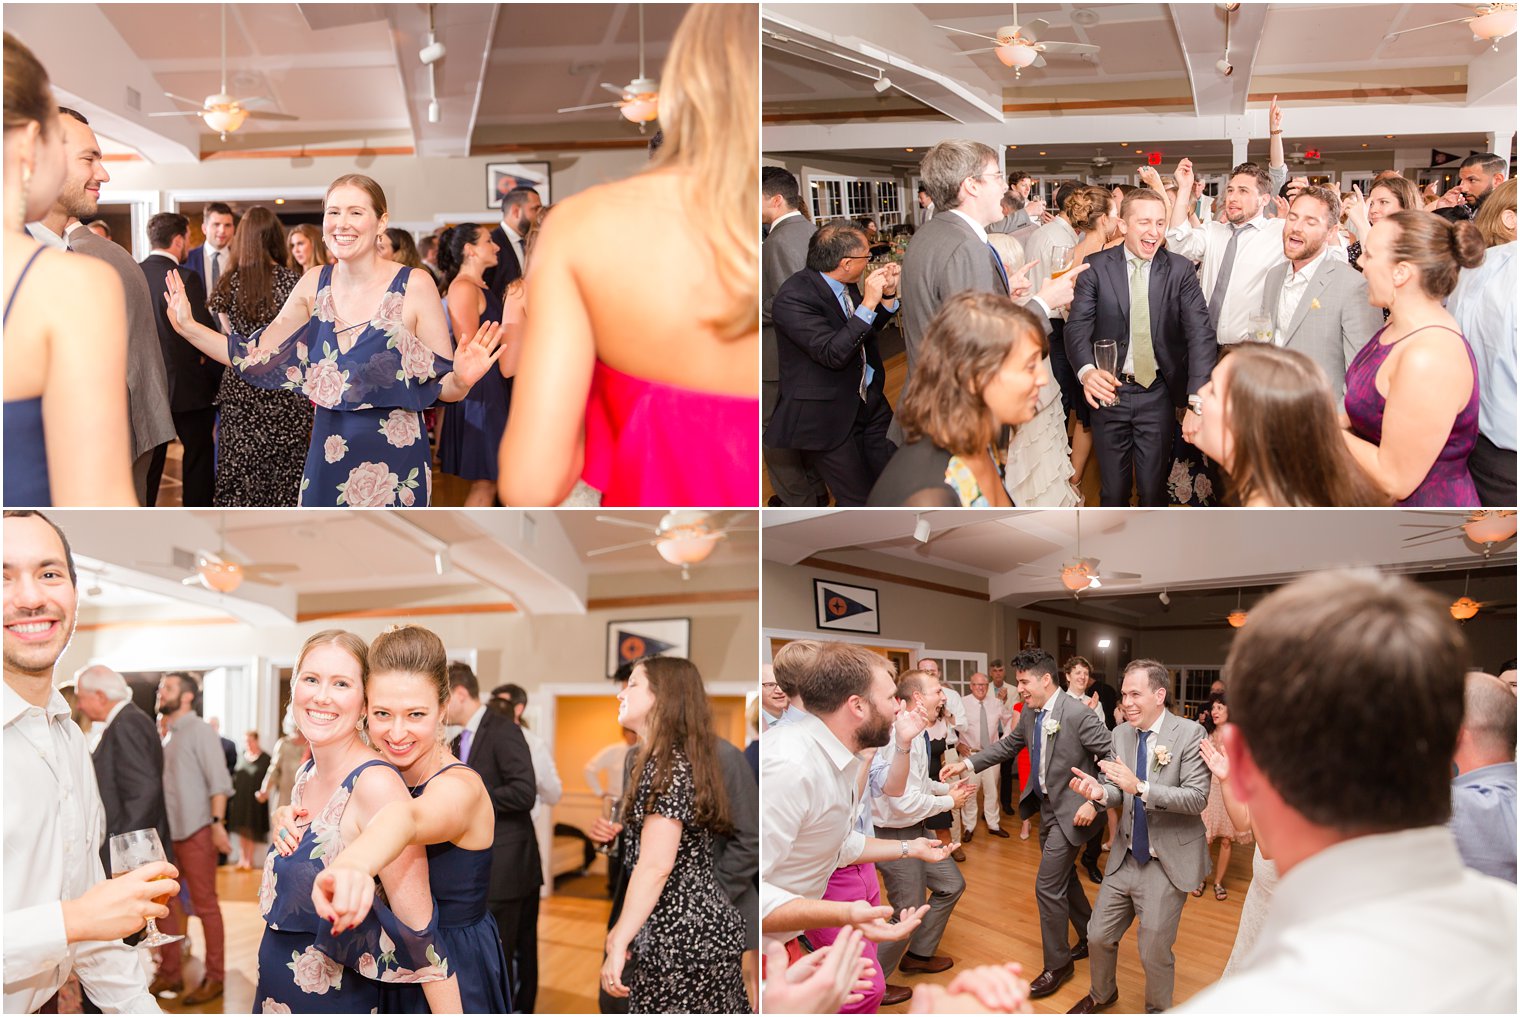 wedding party dances at reception at Brant Beach Yacht Club photographed by Idalia Photography